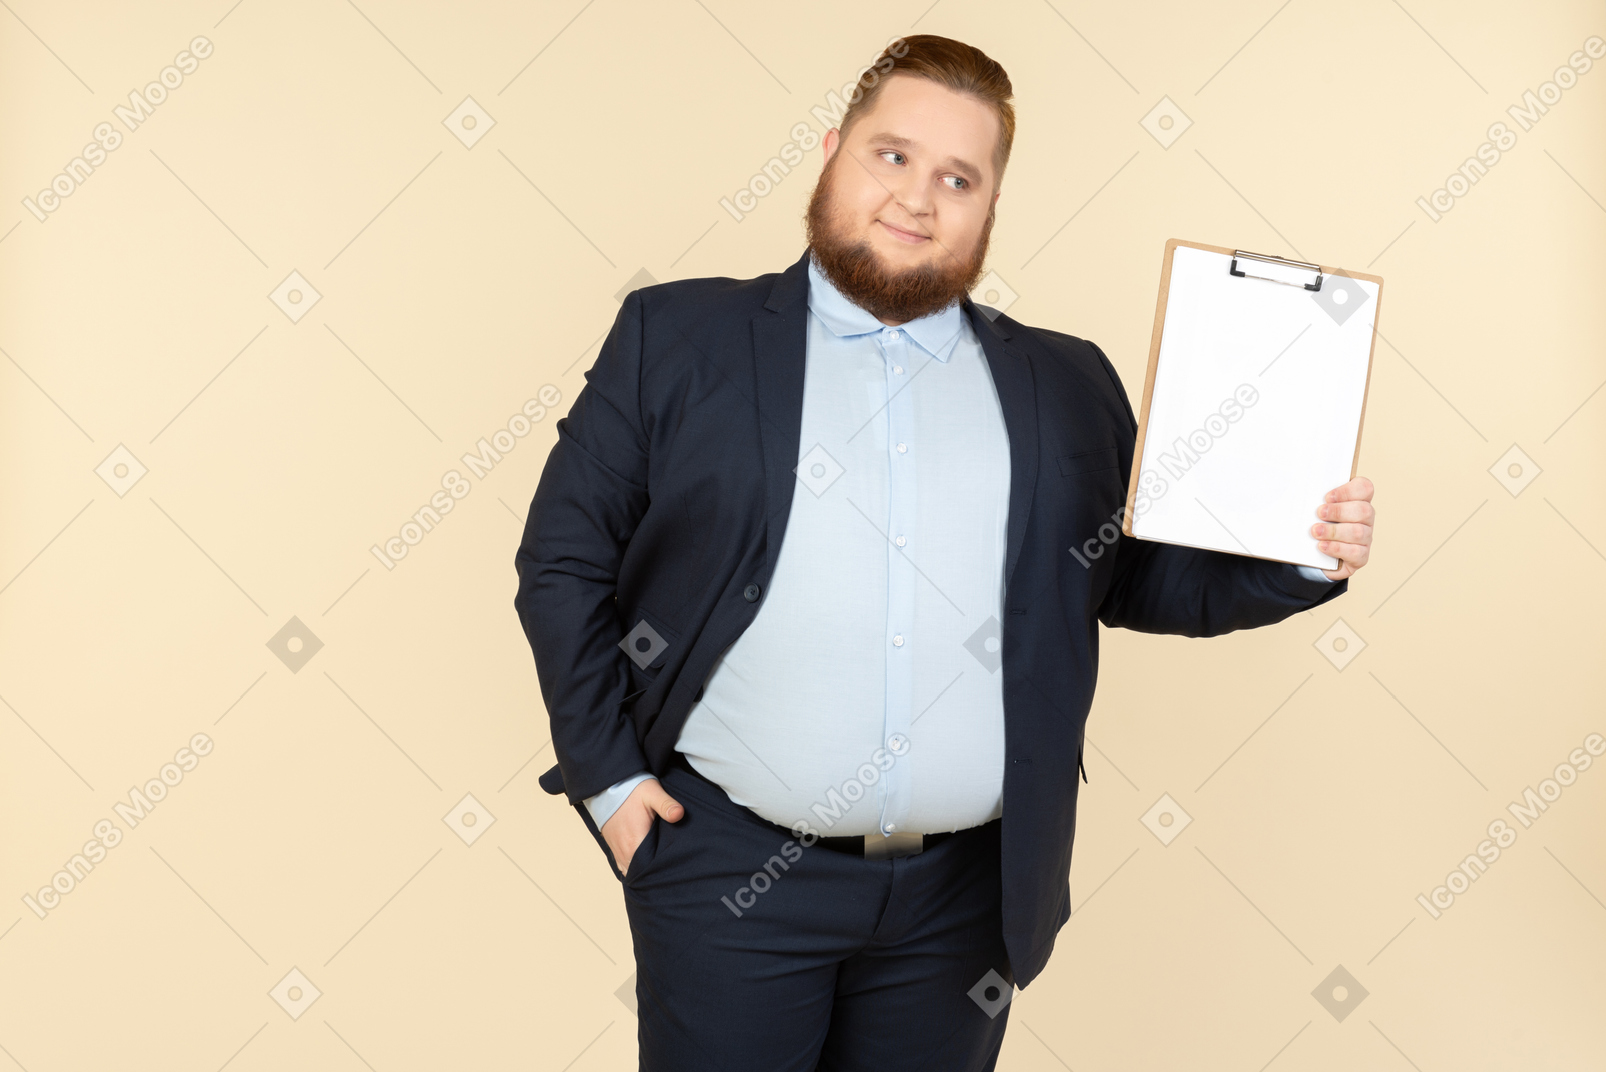 Confident looking young male office worker holding folder